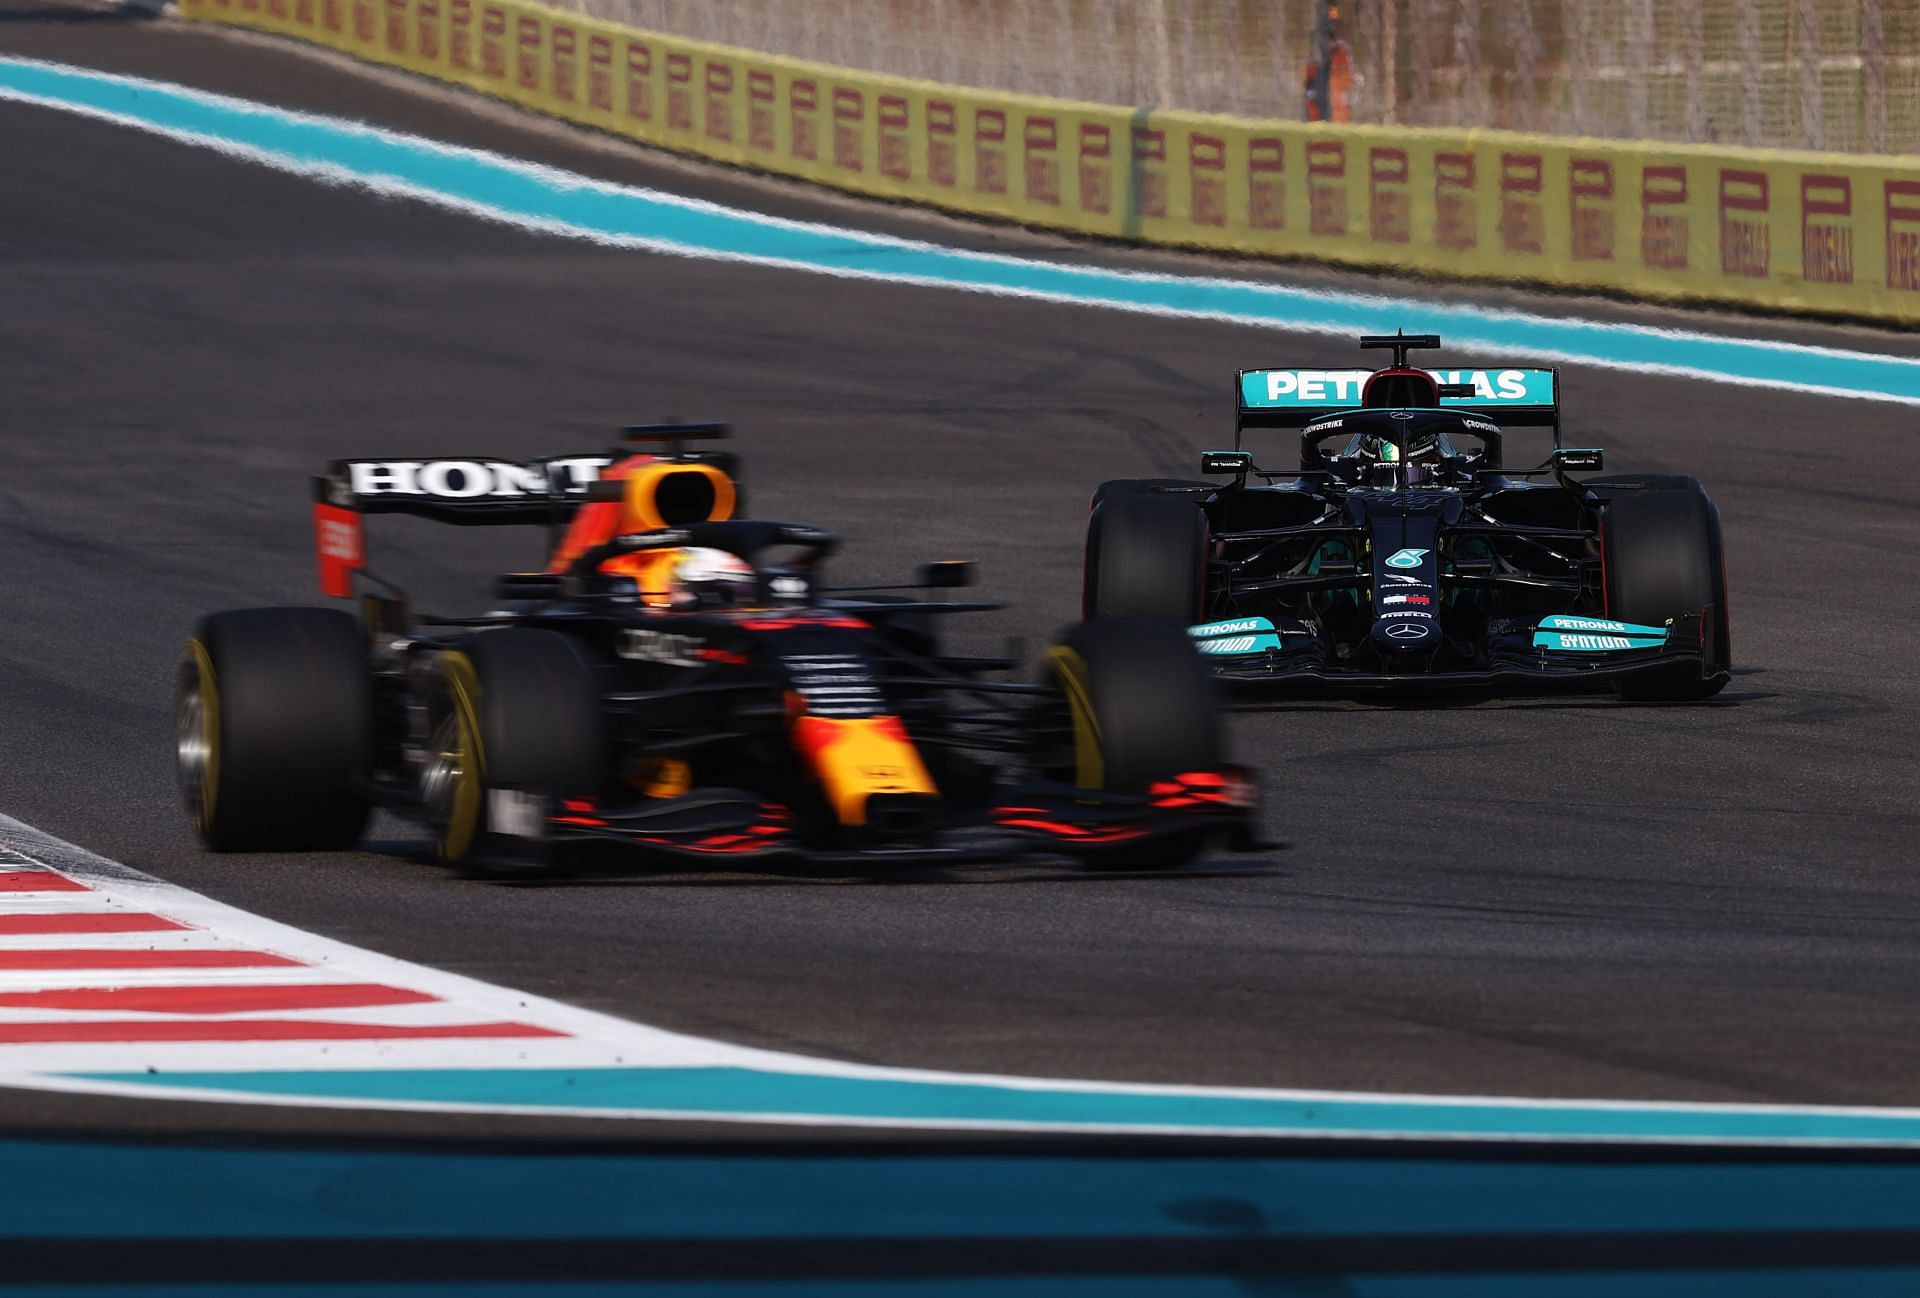 Max Verstappen (left) and Lewis Hamilton (right) at the 2021 Abu Dhabi Grand Prix (Photo by Lars Baron/Getty Images)